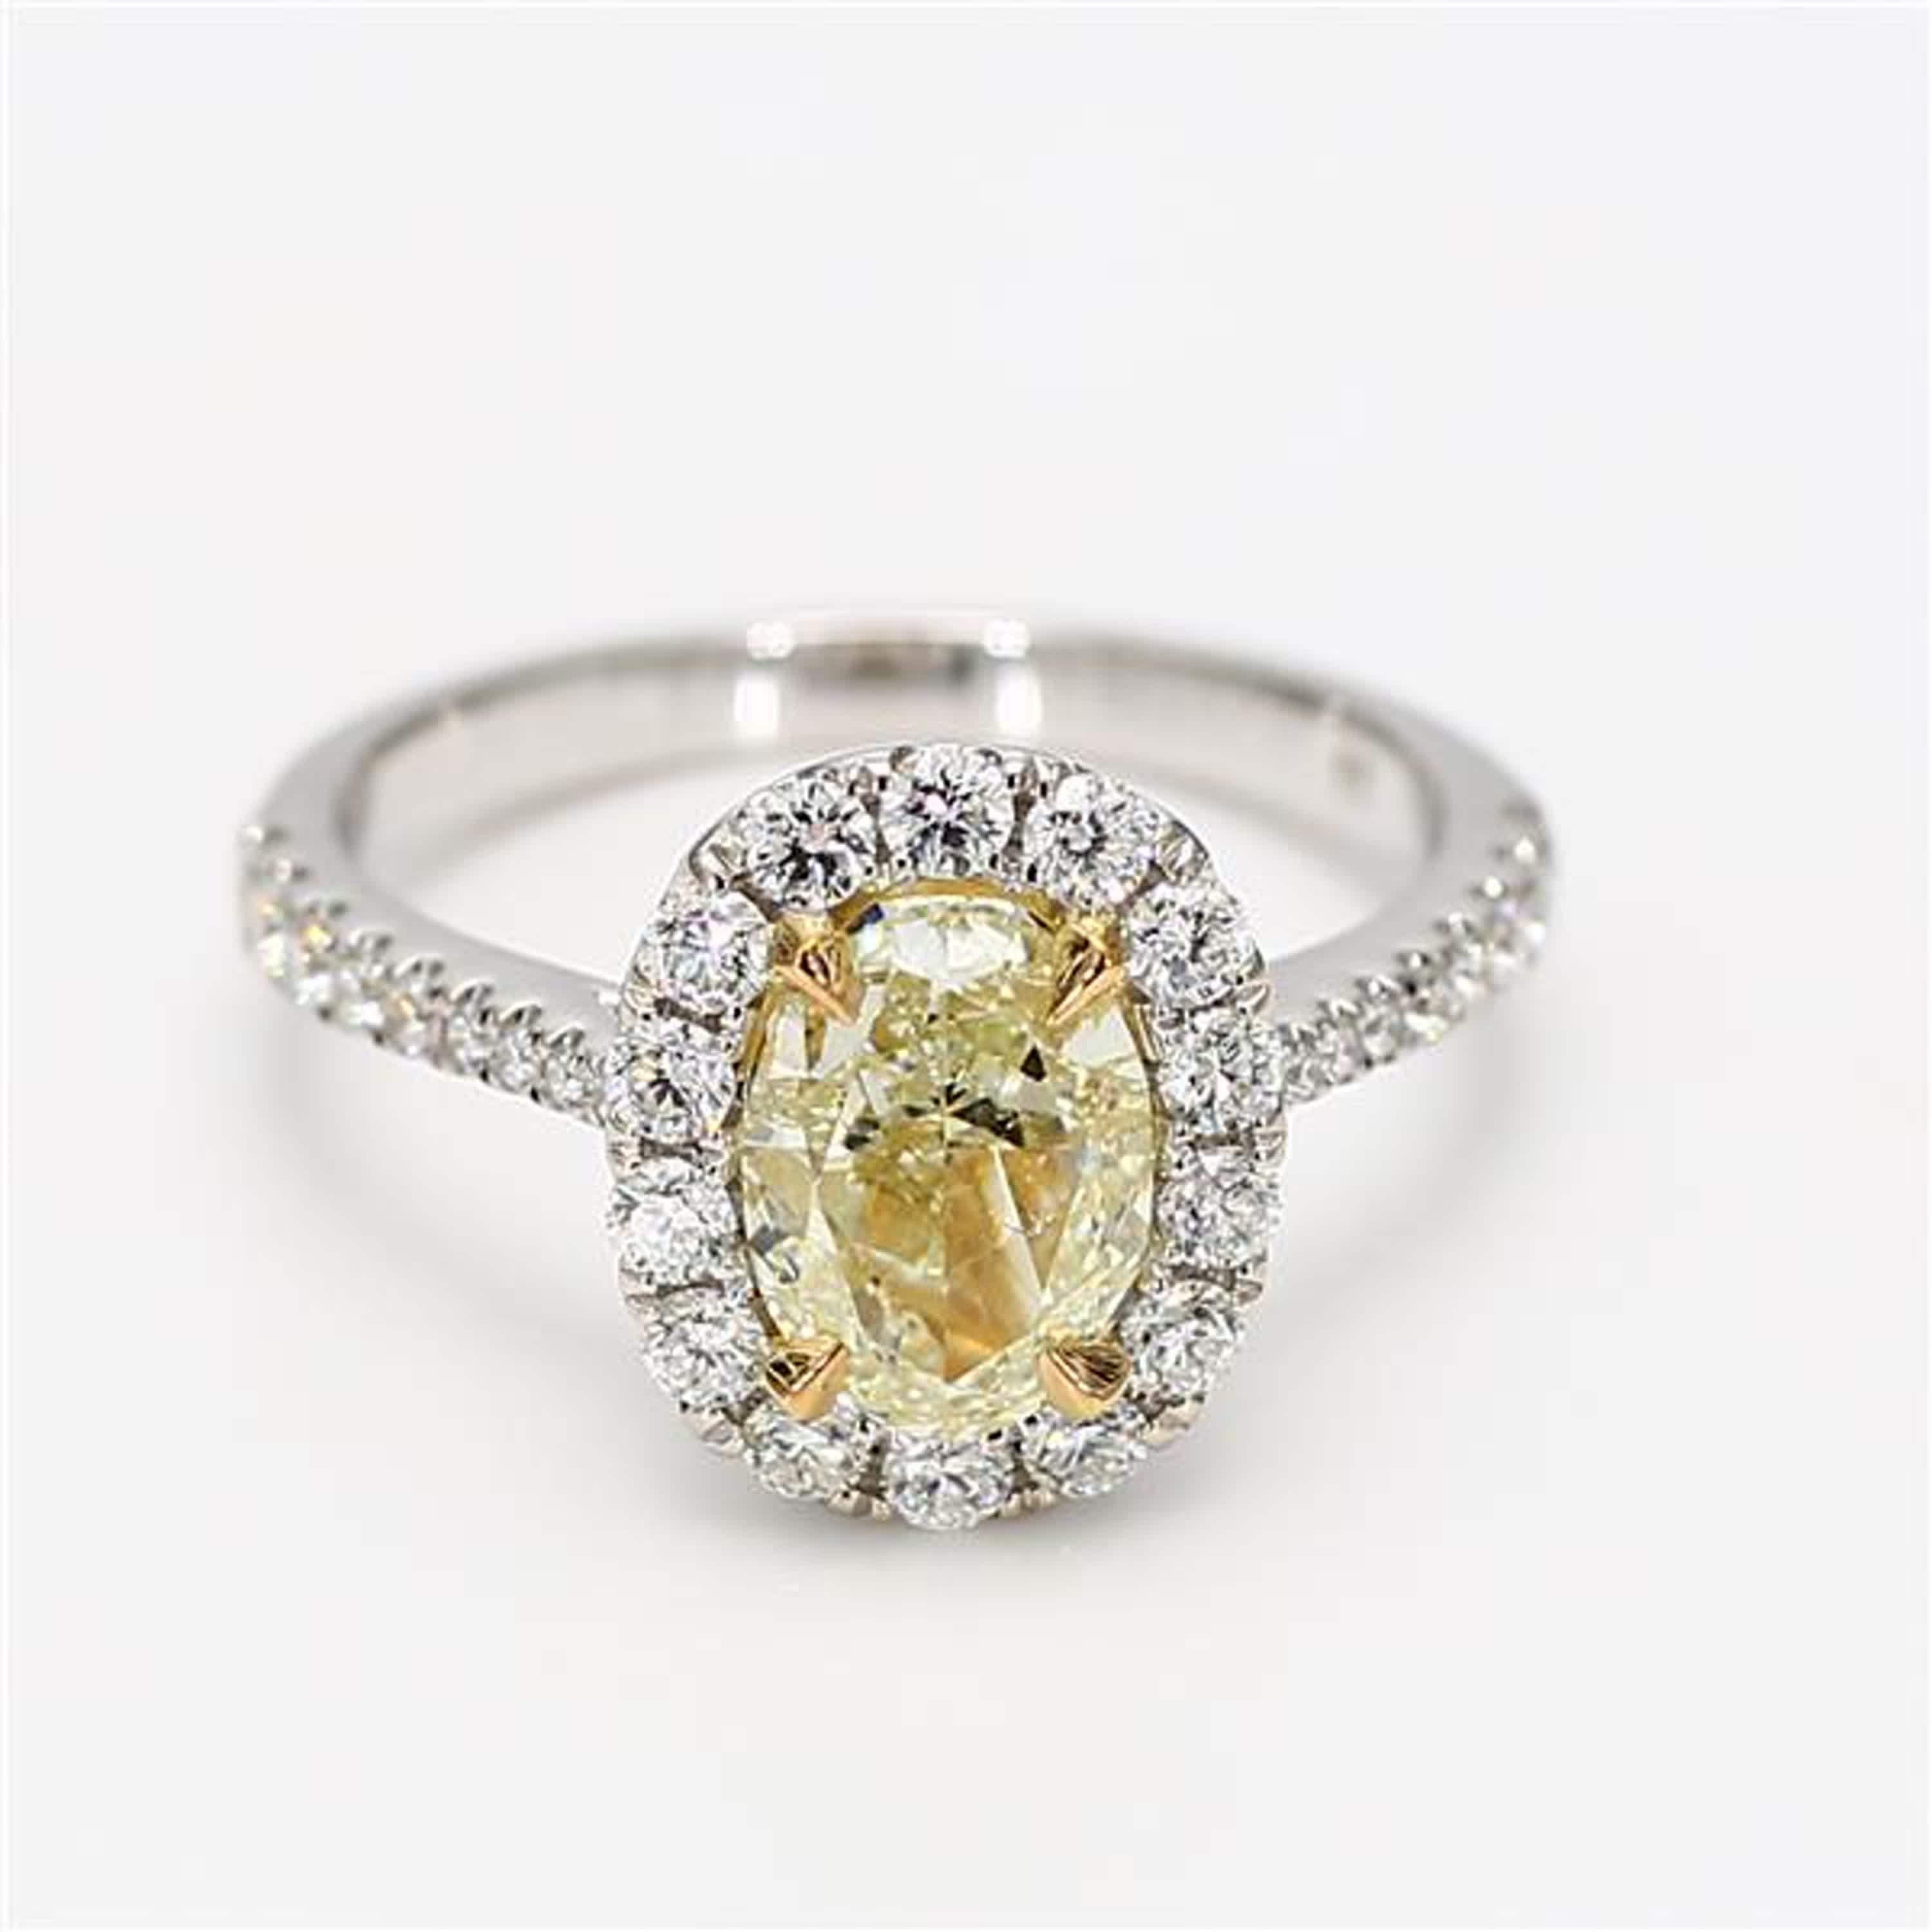 RareGemWorld's classic diamond ring. Mounted in a beautiful 18K Yellow and White Gold setting with a natural oval cut yellow diamond. The yellow diamond is surrounded by round natural white diamond melee. This ring is guaranteed to impress and